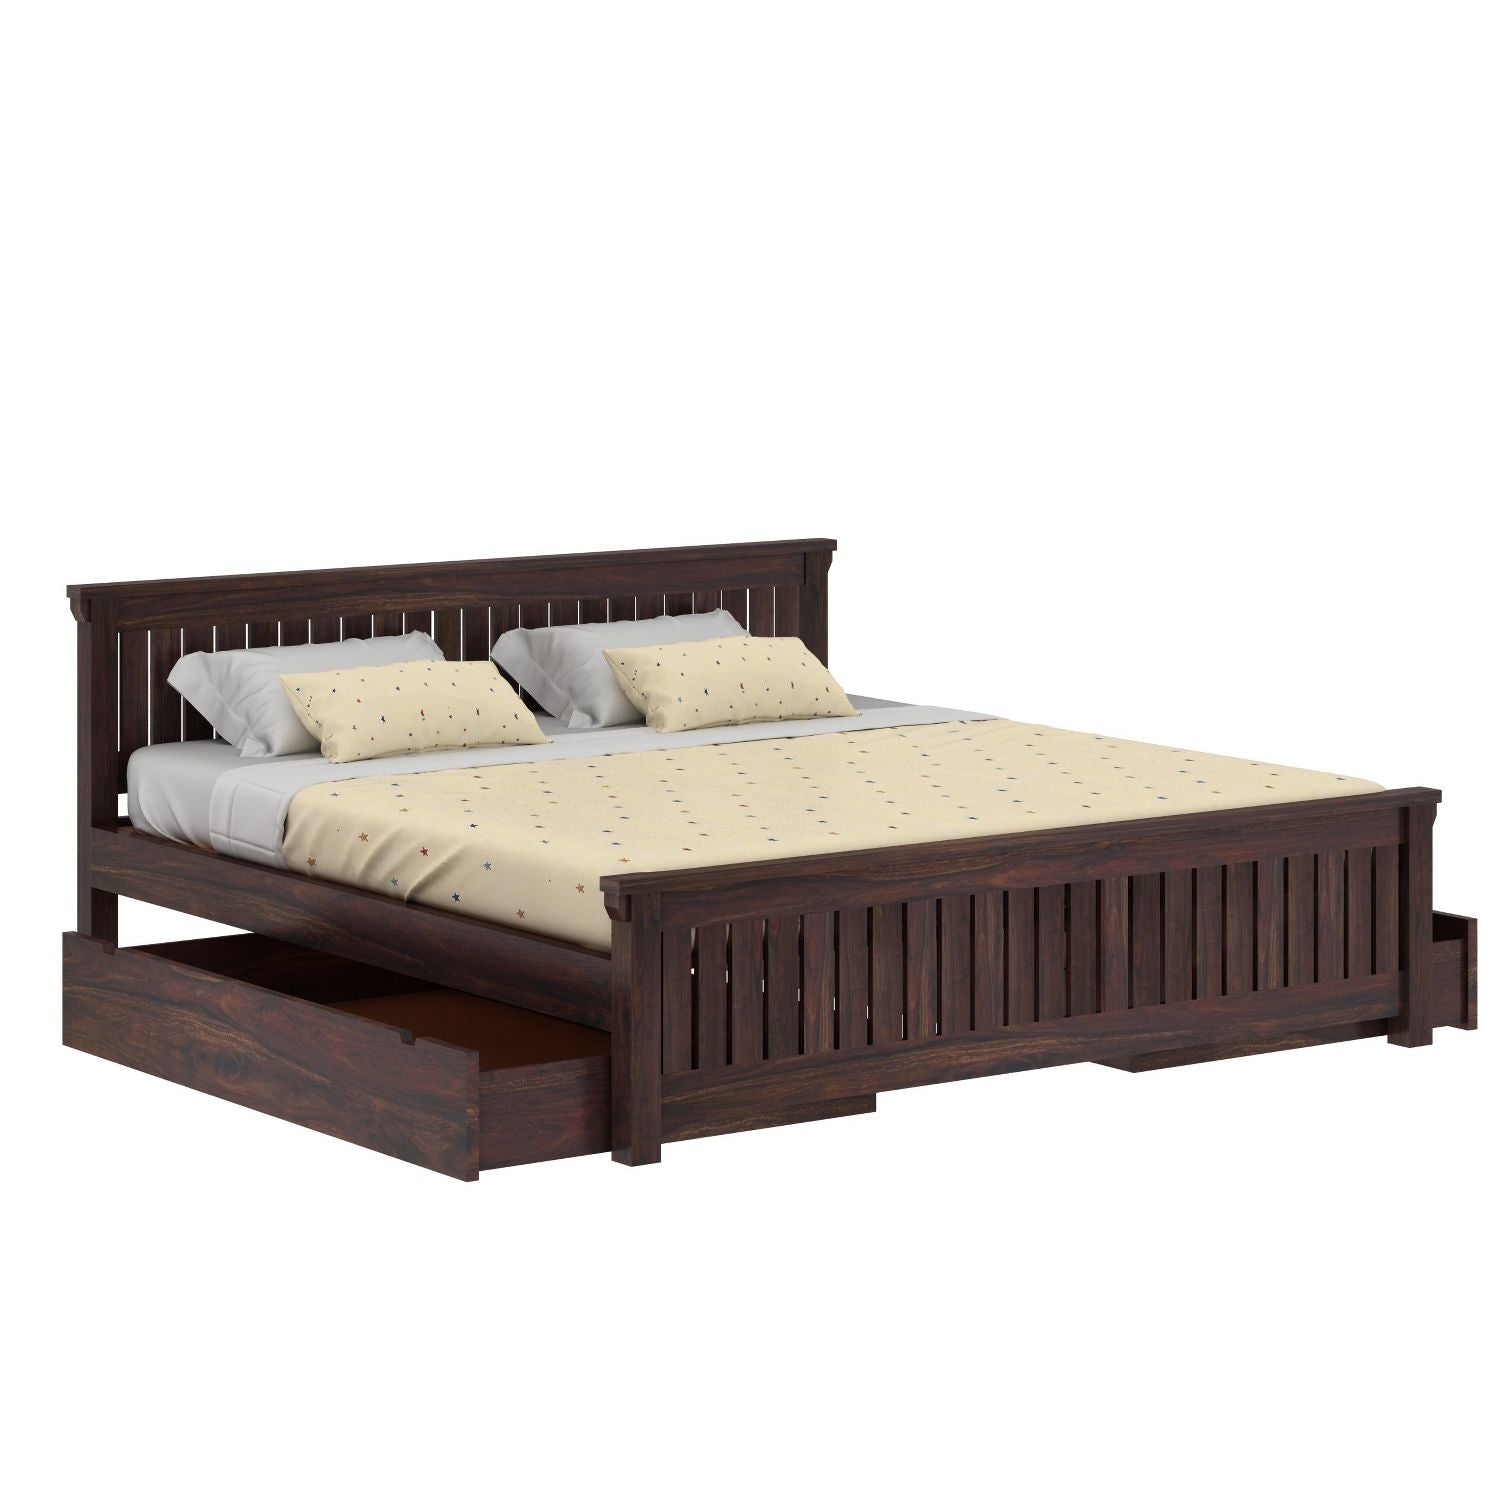 Trinity Solid Sheesham Wood Bed With Two Drawers (King Size, Walnut Finish)